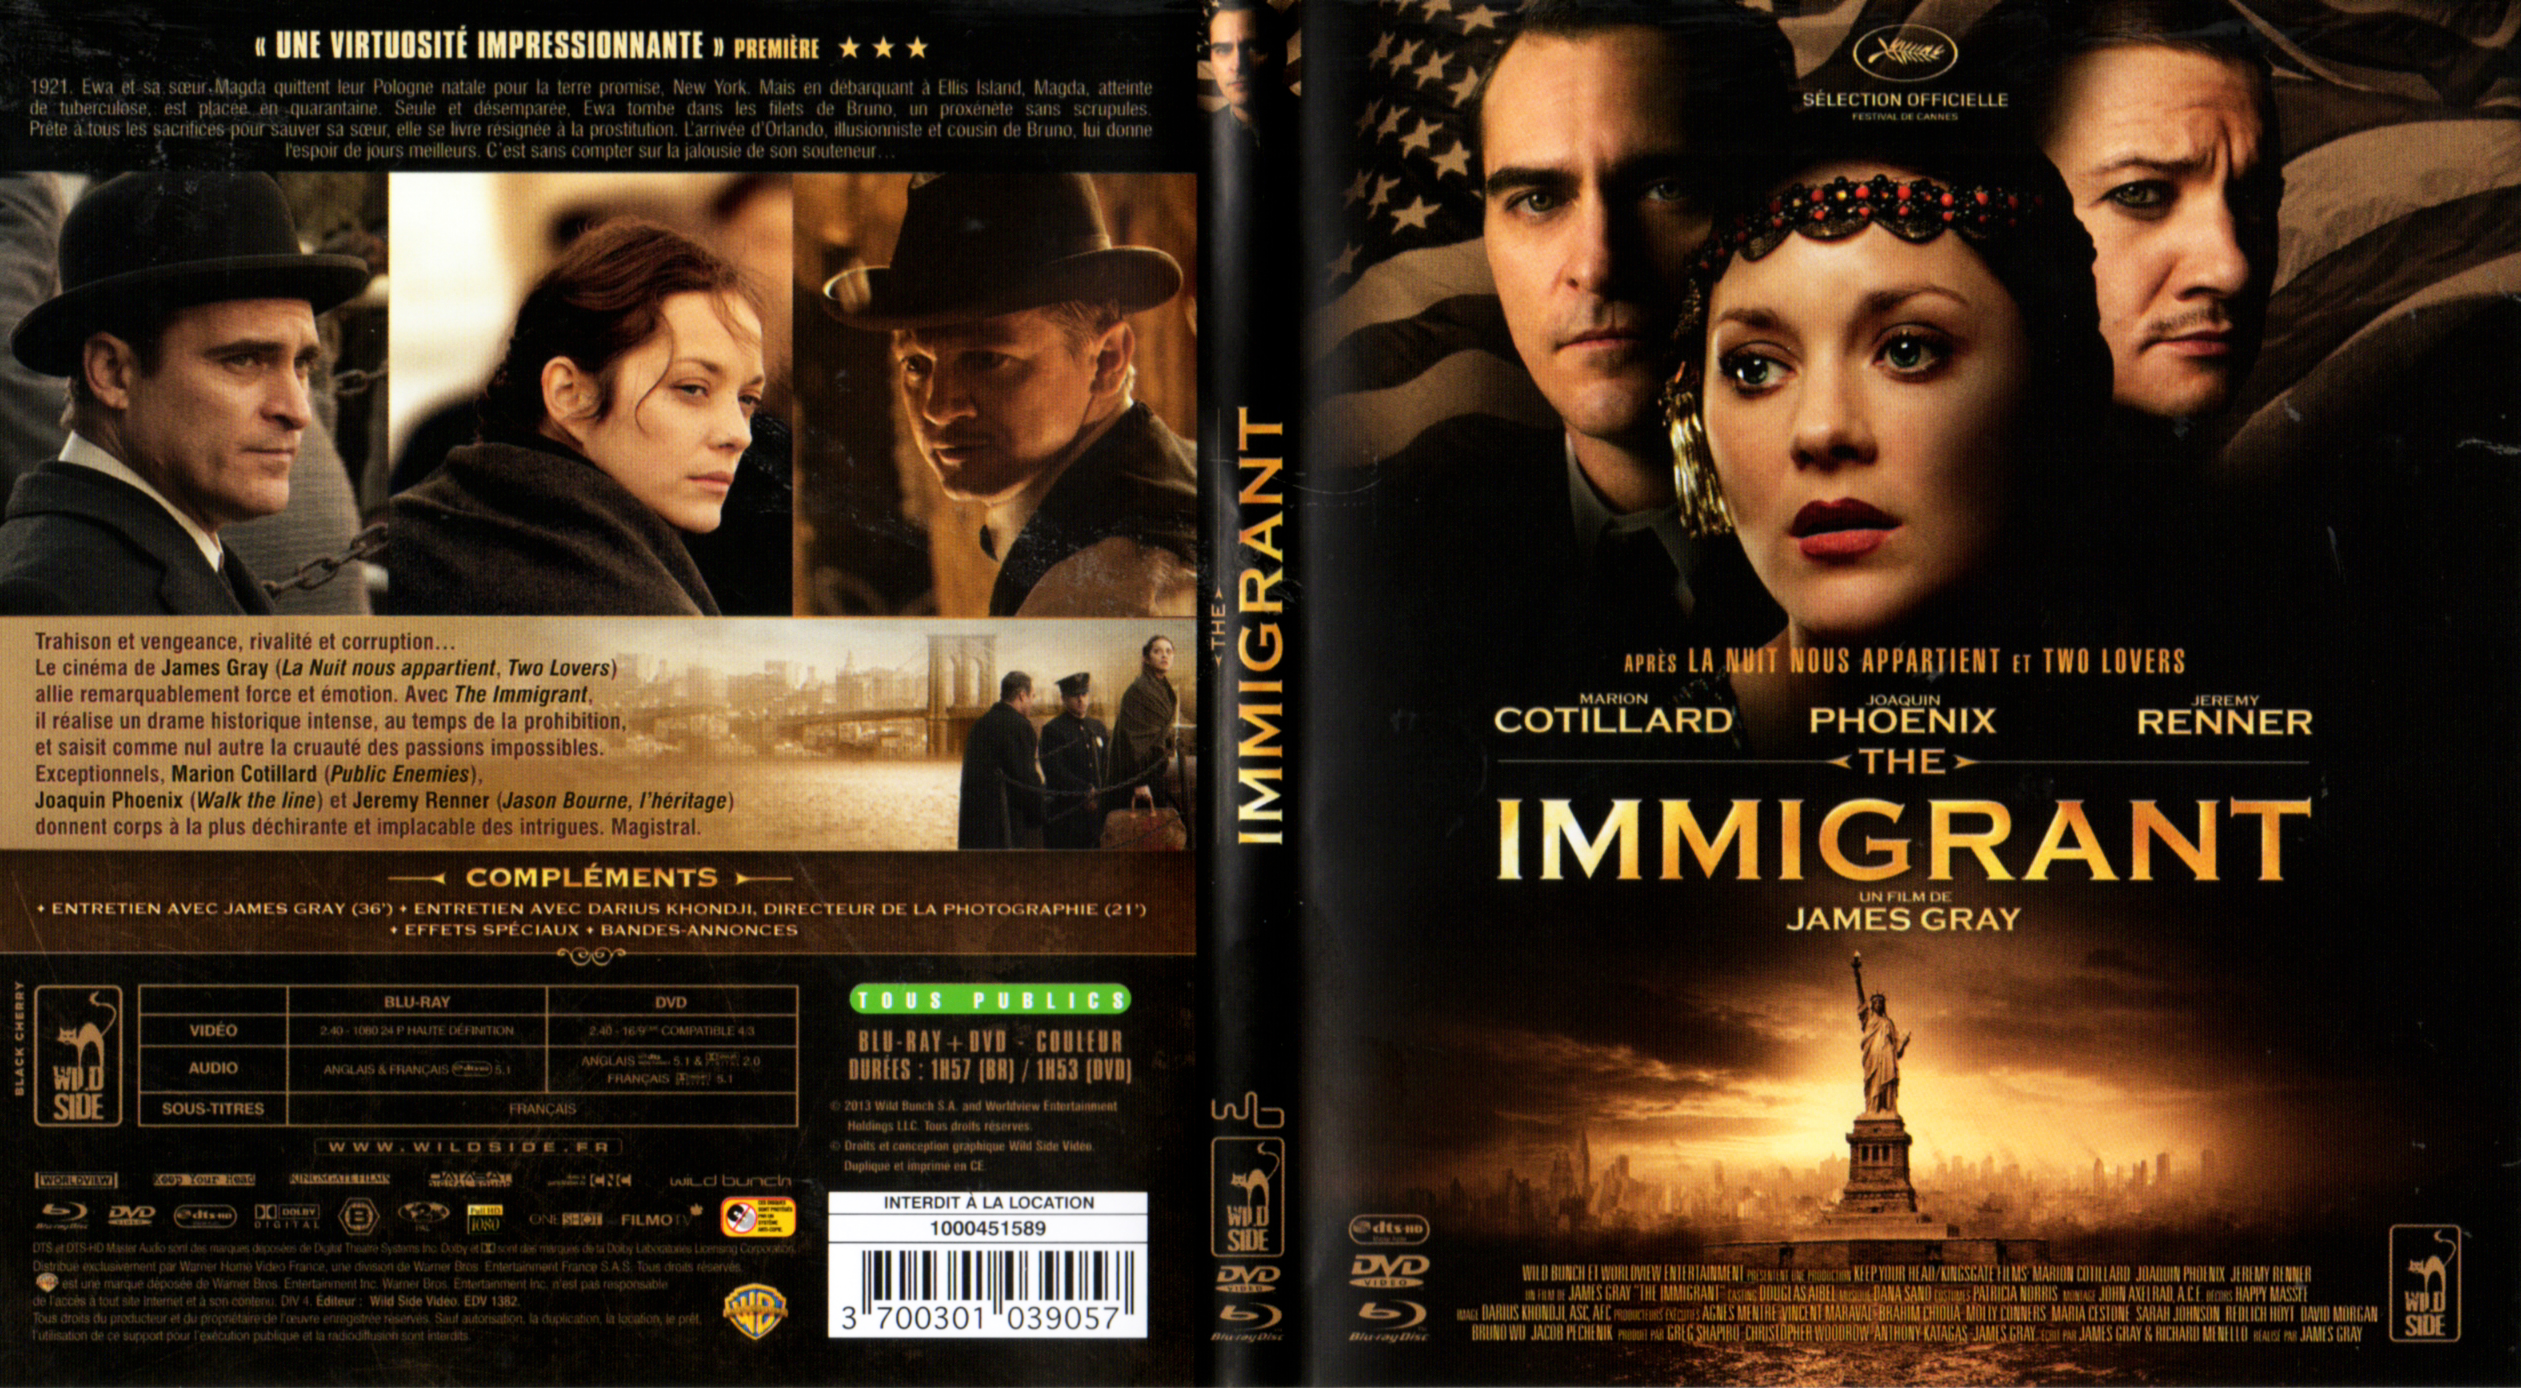 Jaquette DVD The Immigrant (BLU-RAY)